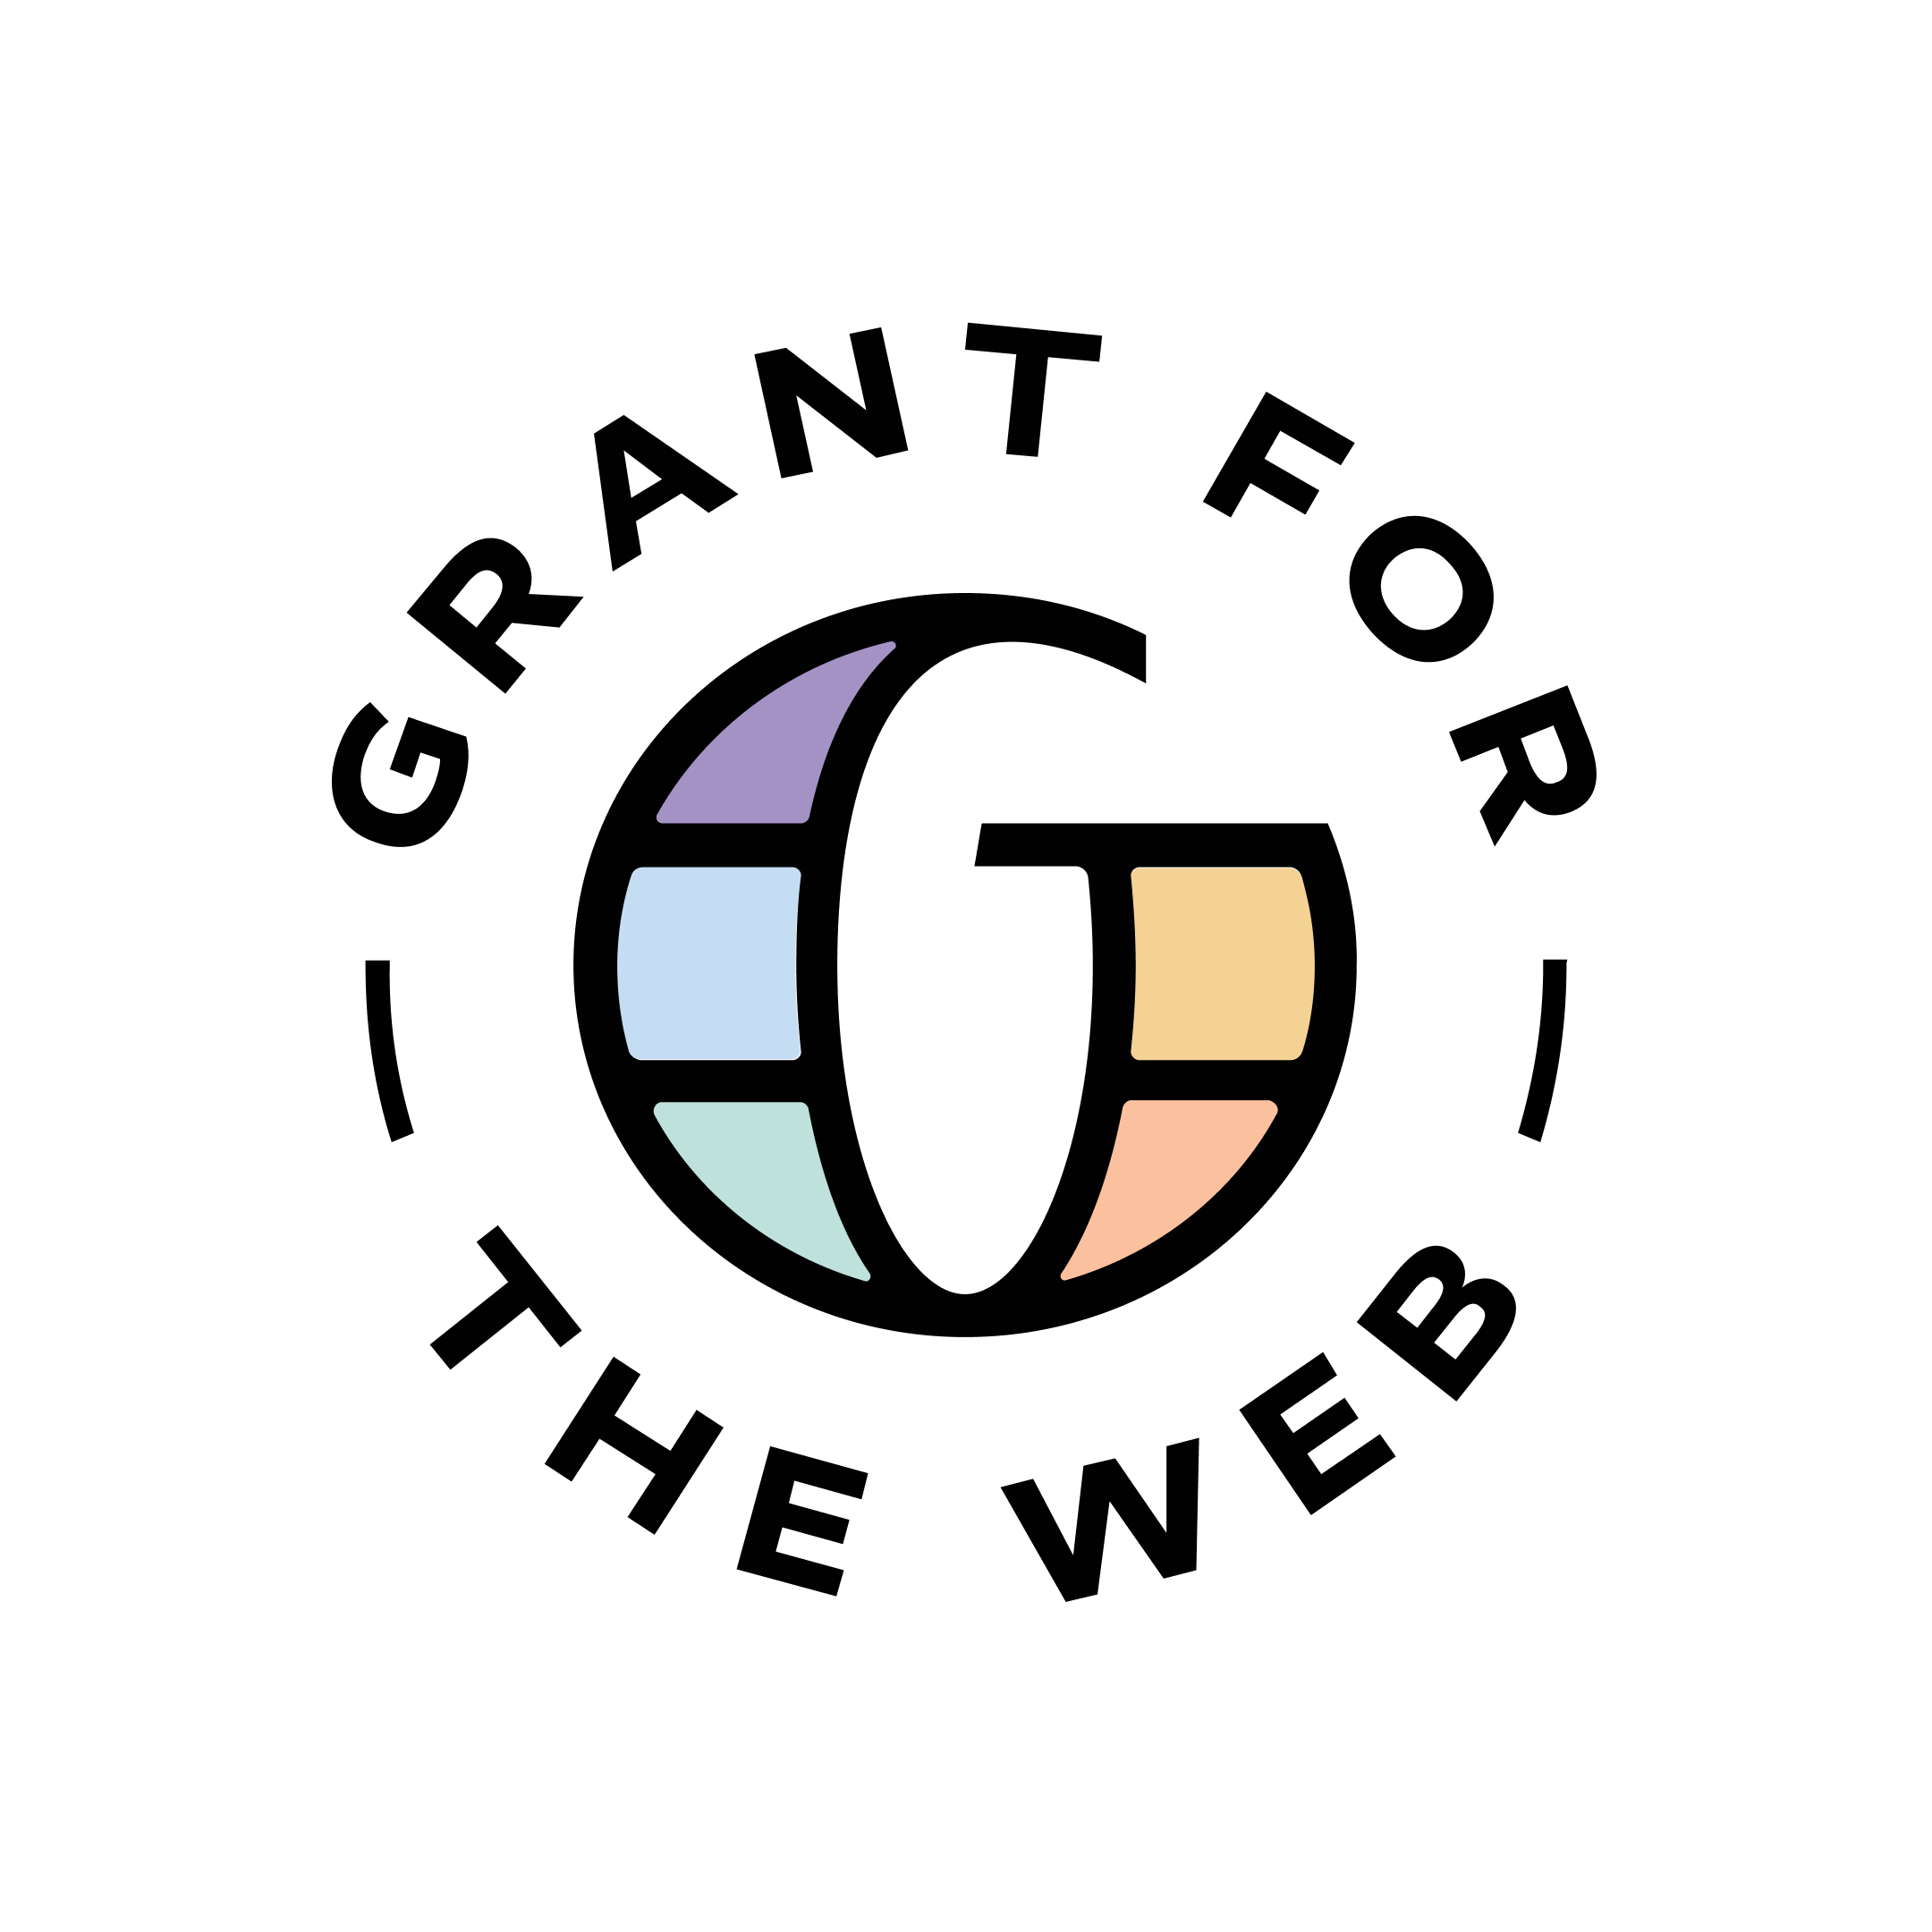 Grant for the Web Logo